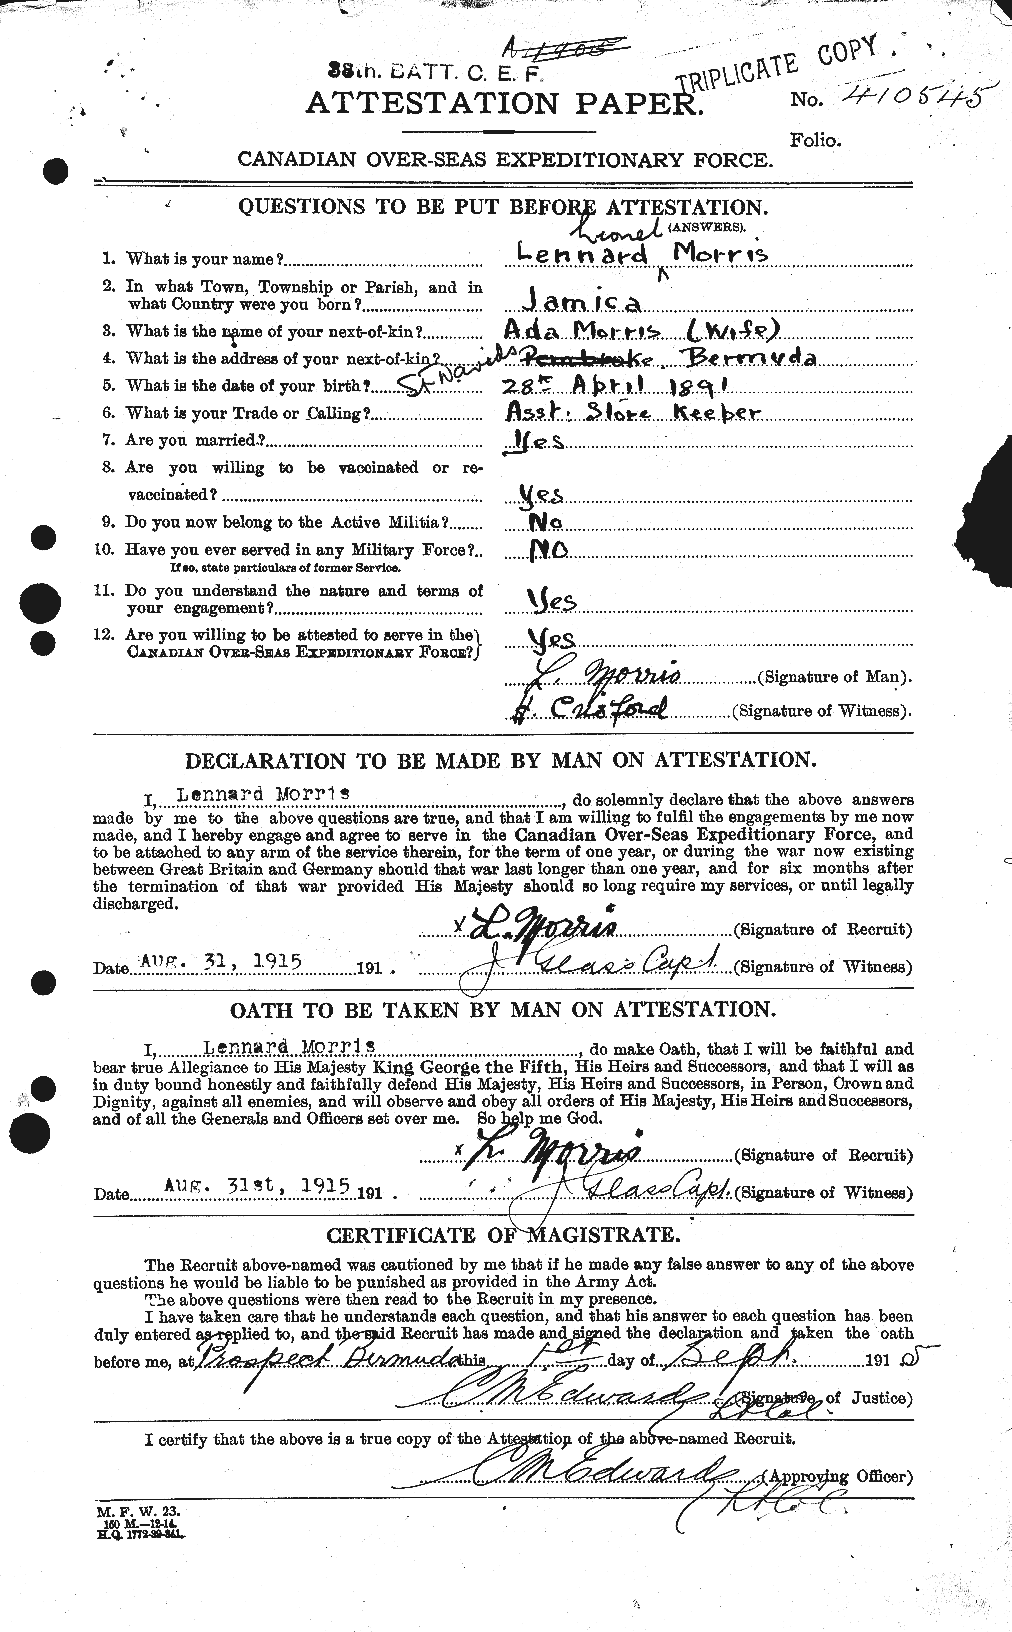 Personnel Records of the First World War - CEF 508568a